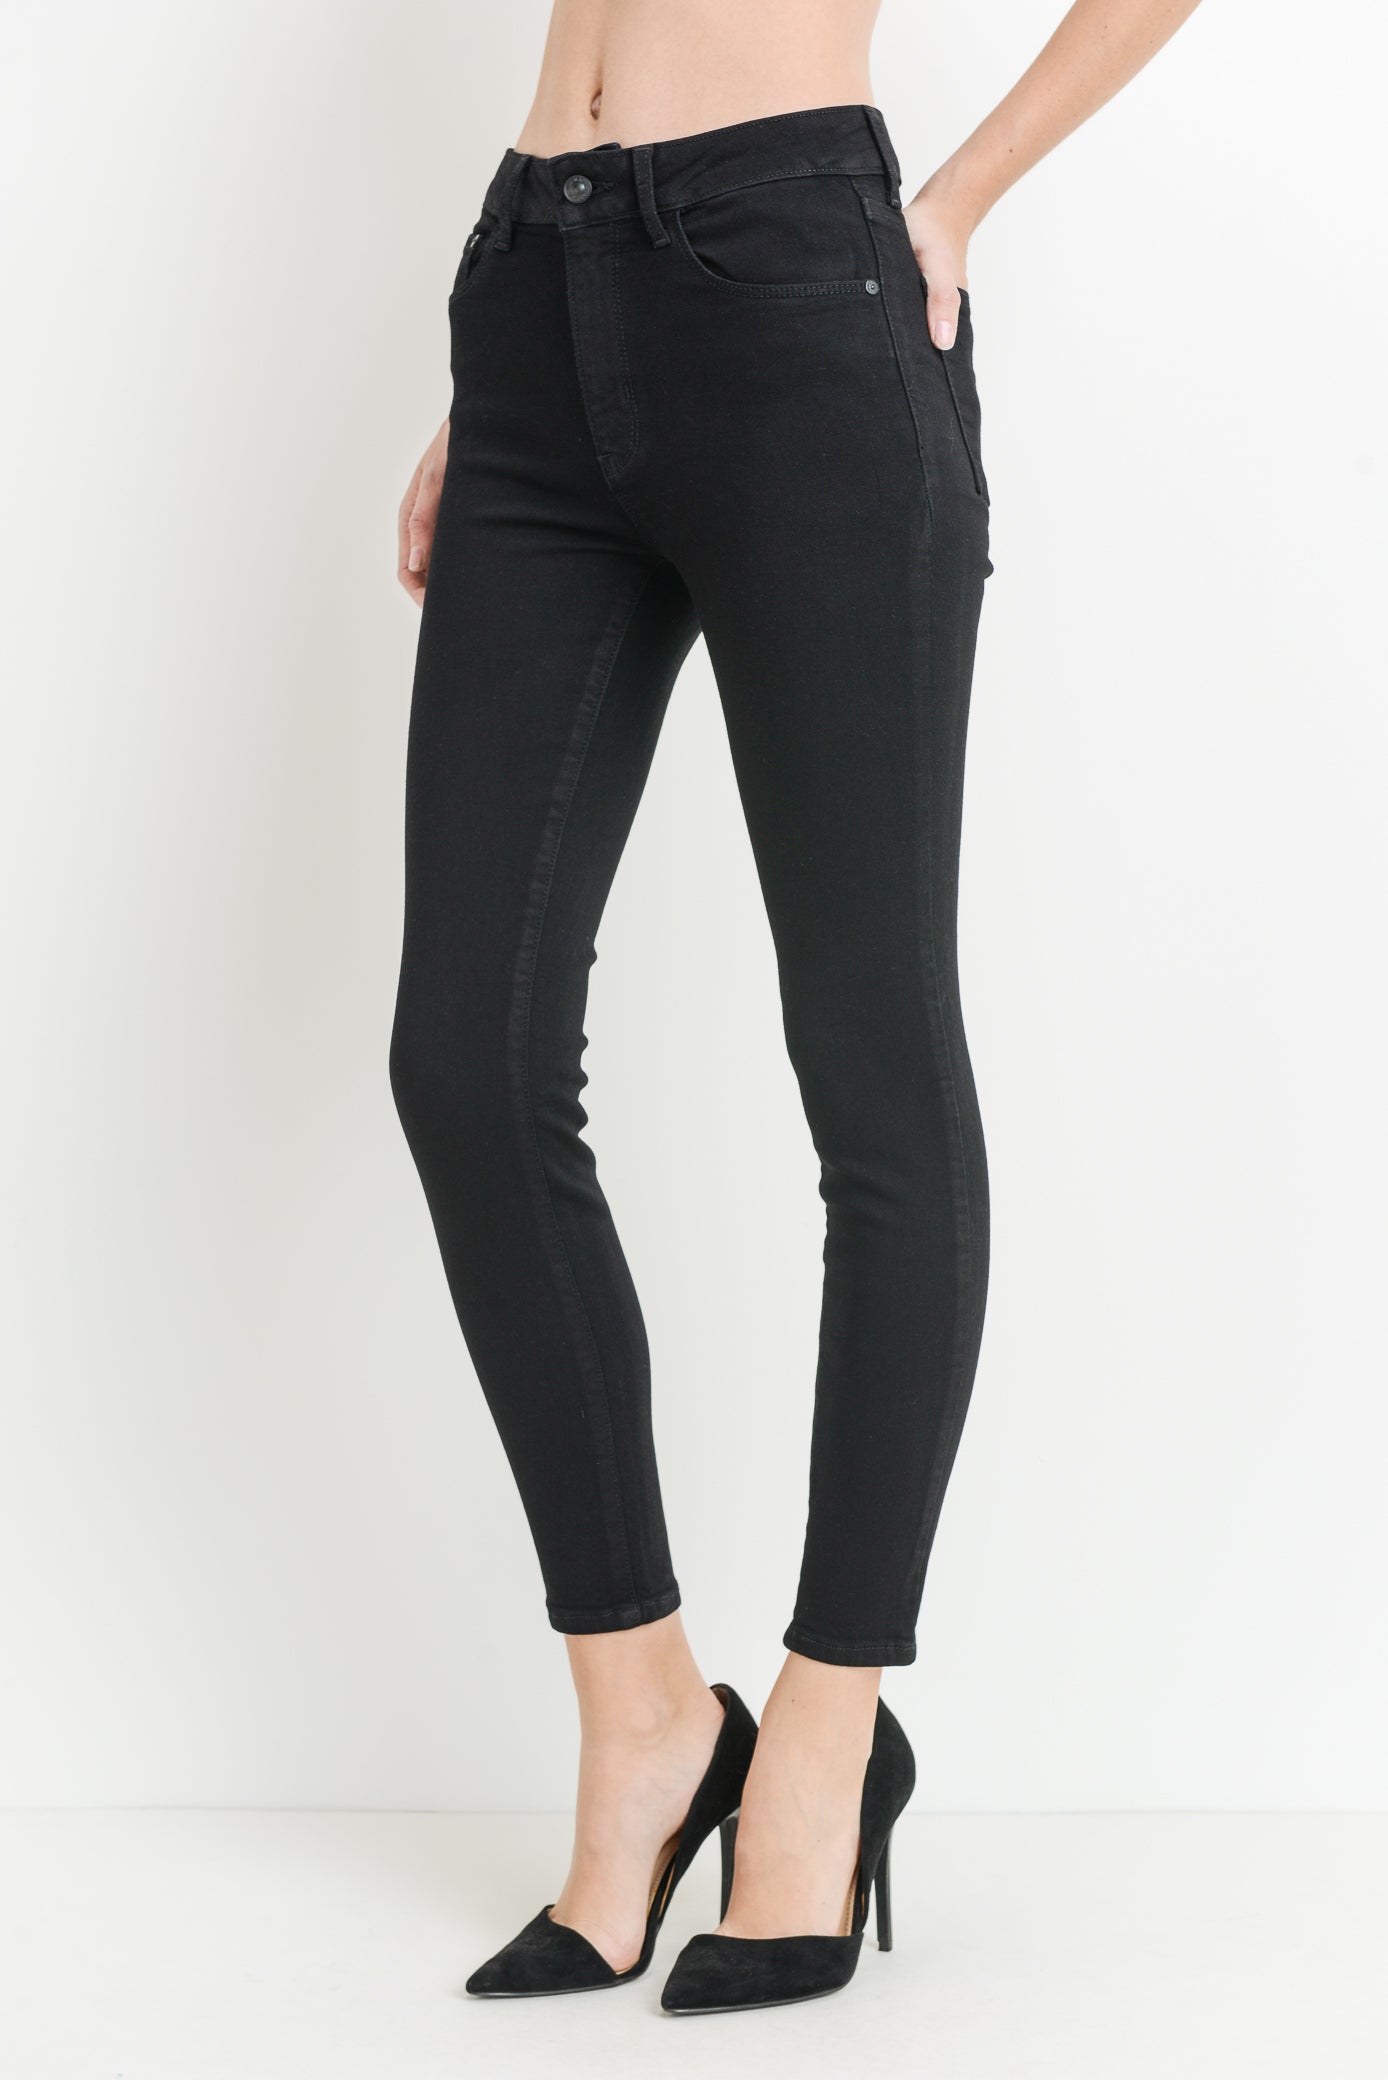 High Rise Black Skinny Jeans at Maria Vincent Boutique